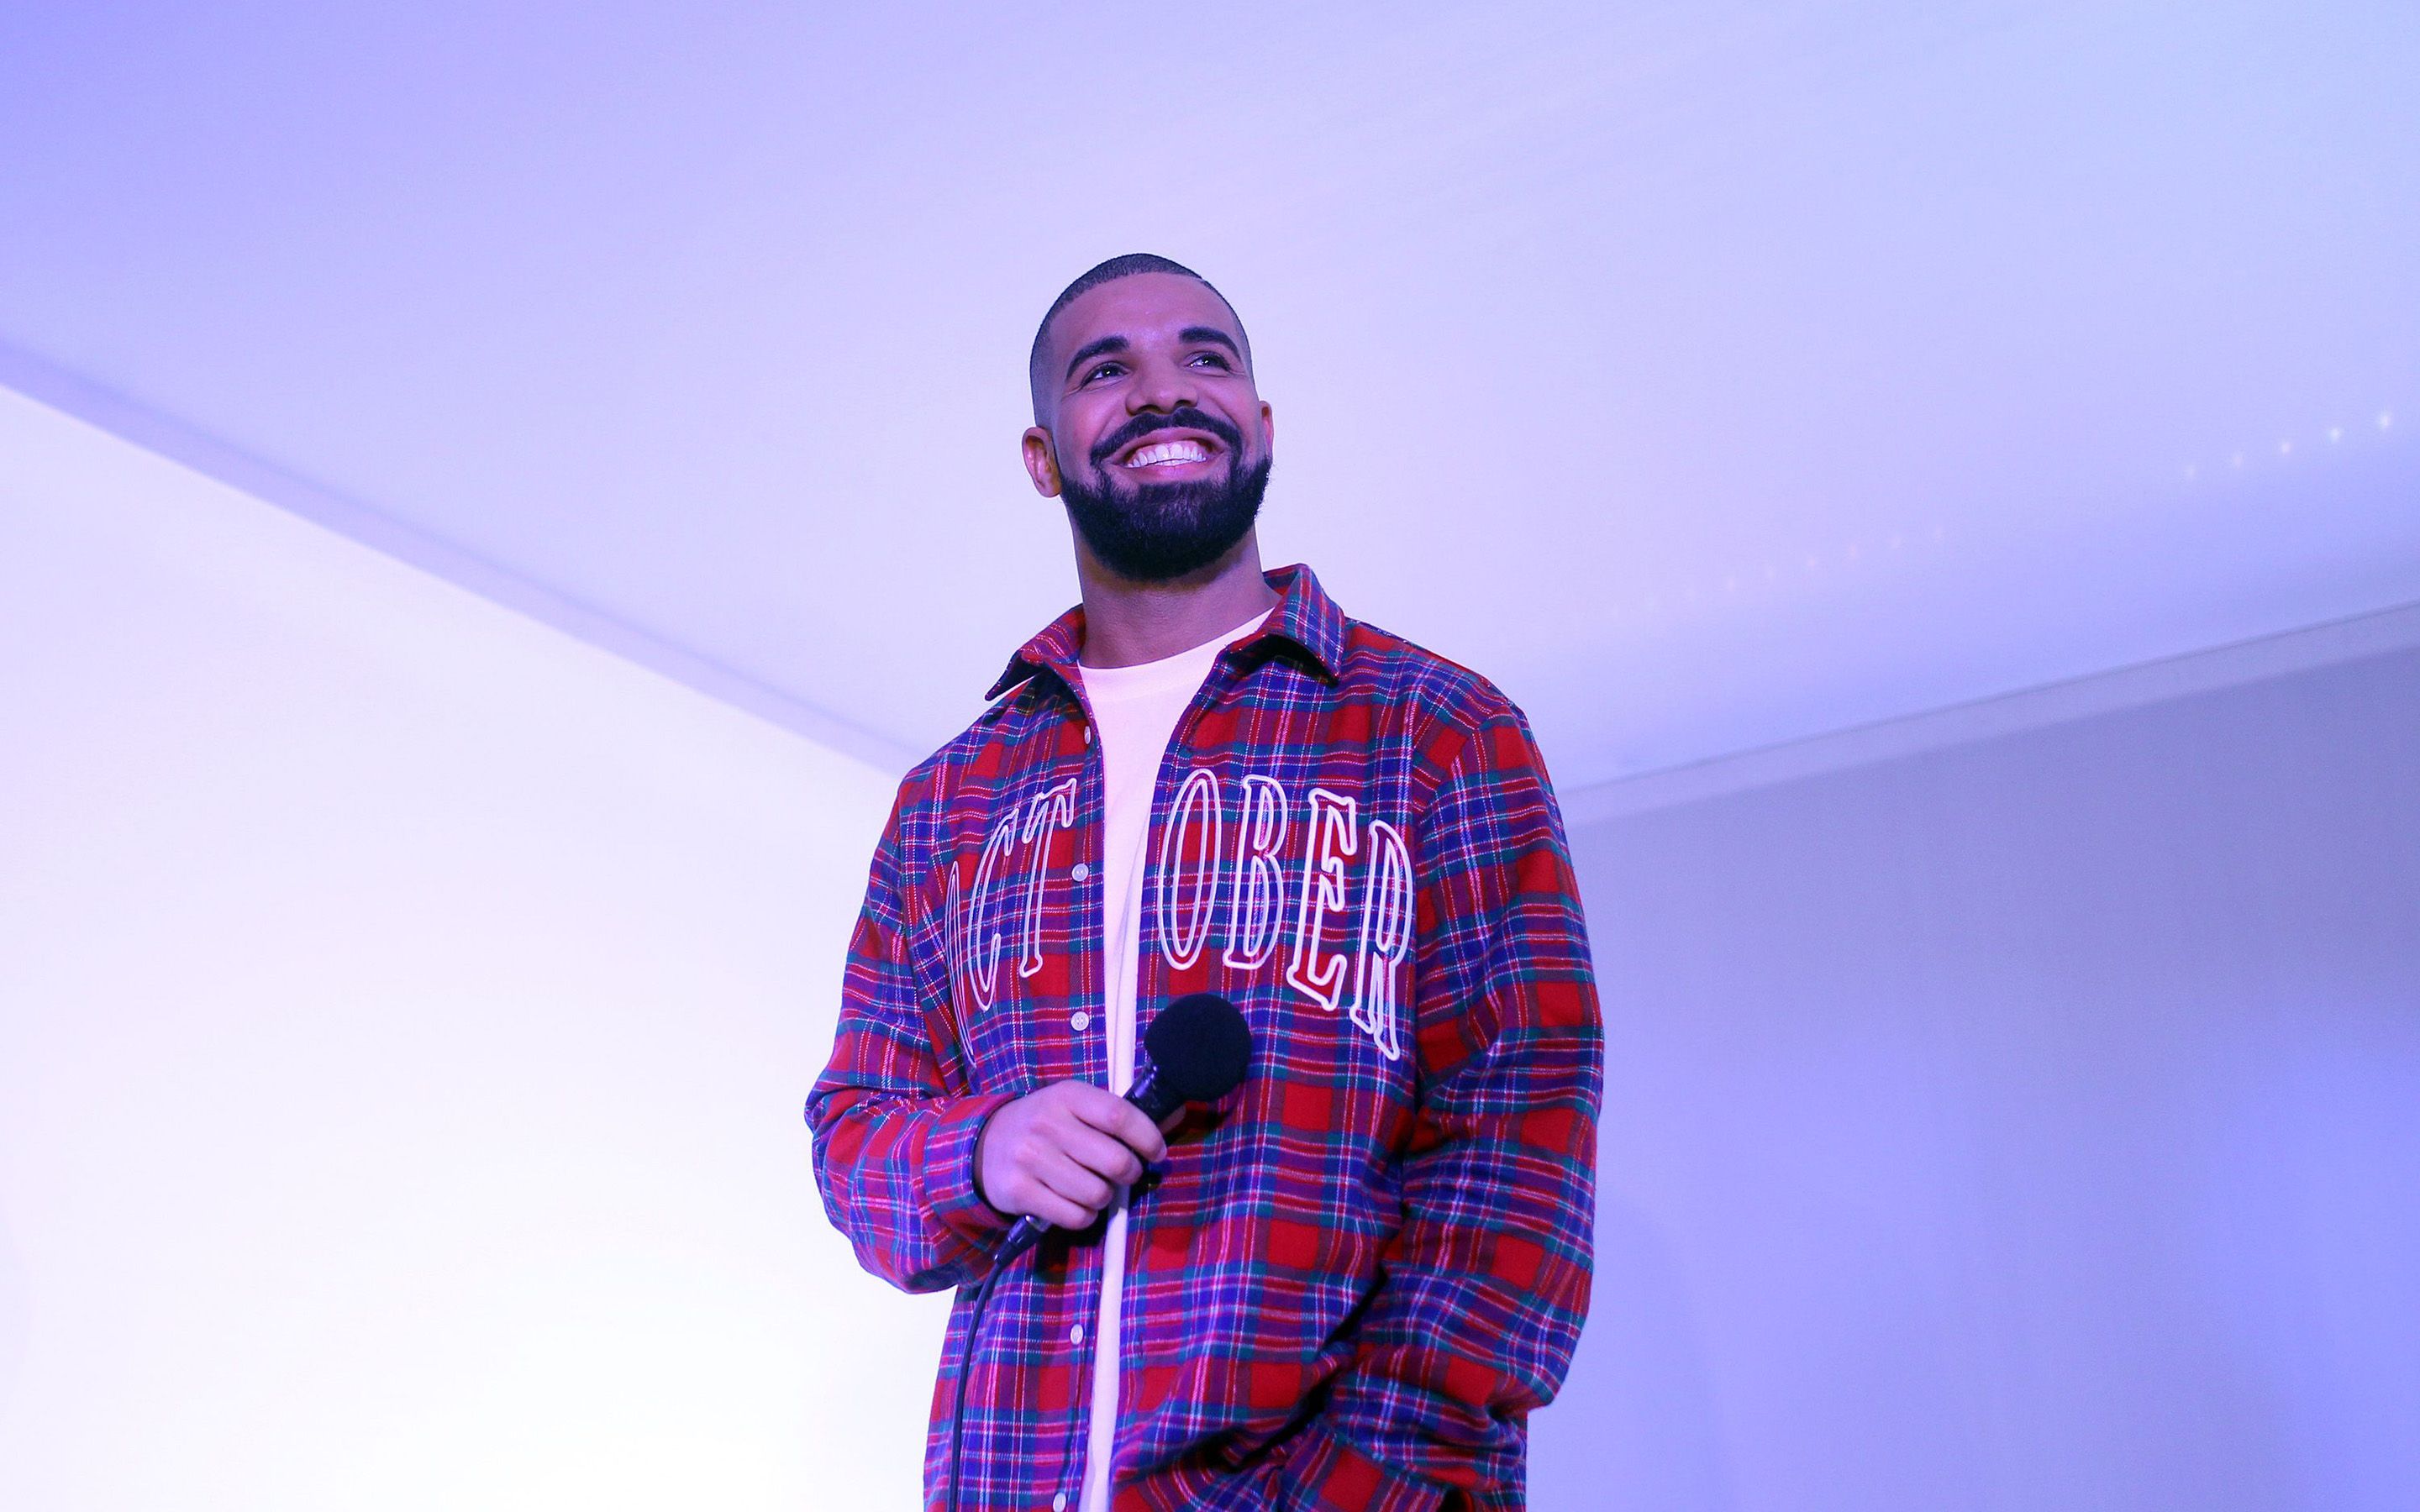 Download wallpaper Drake, canadian rapper, fan meeting, music stars, Aubrey Drake Graham, photohoot, Drake with microphone for desktop with resolution 2880x1800. High Quality HD picture wallpaper